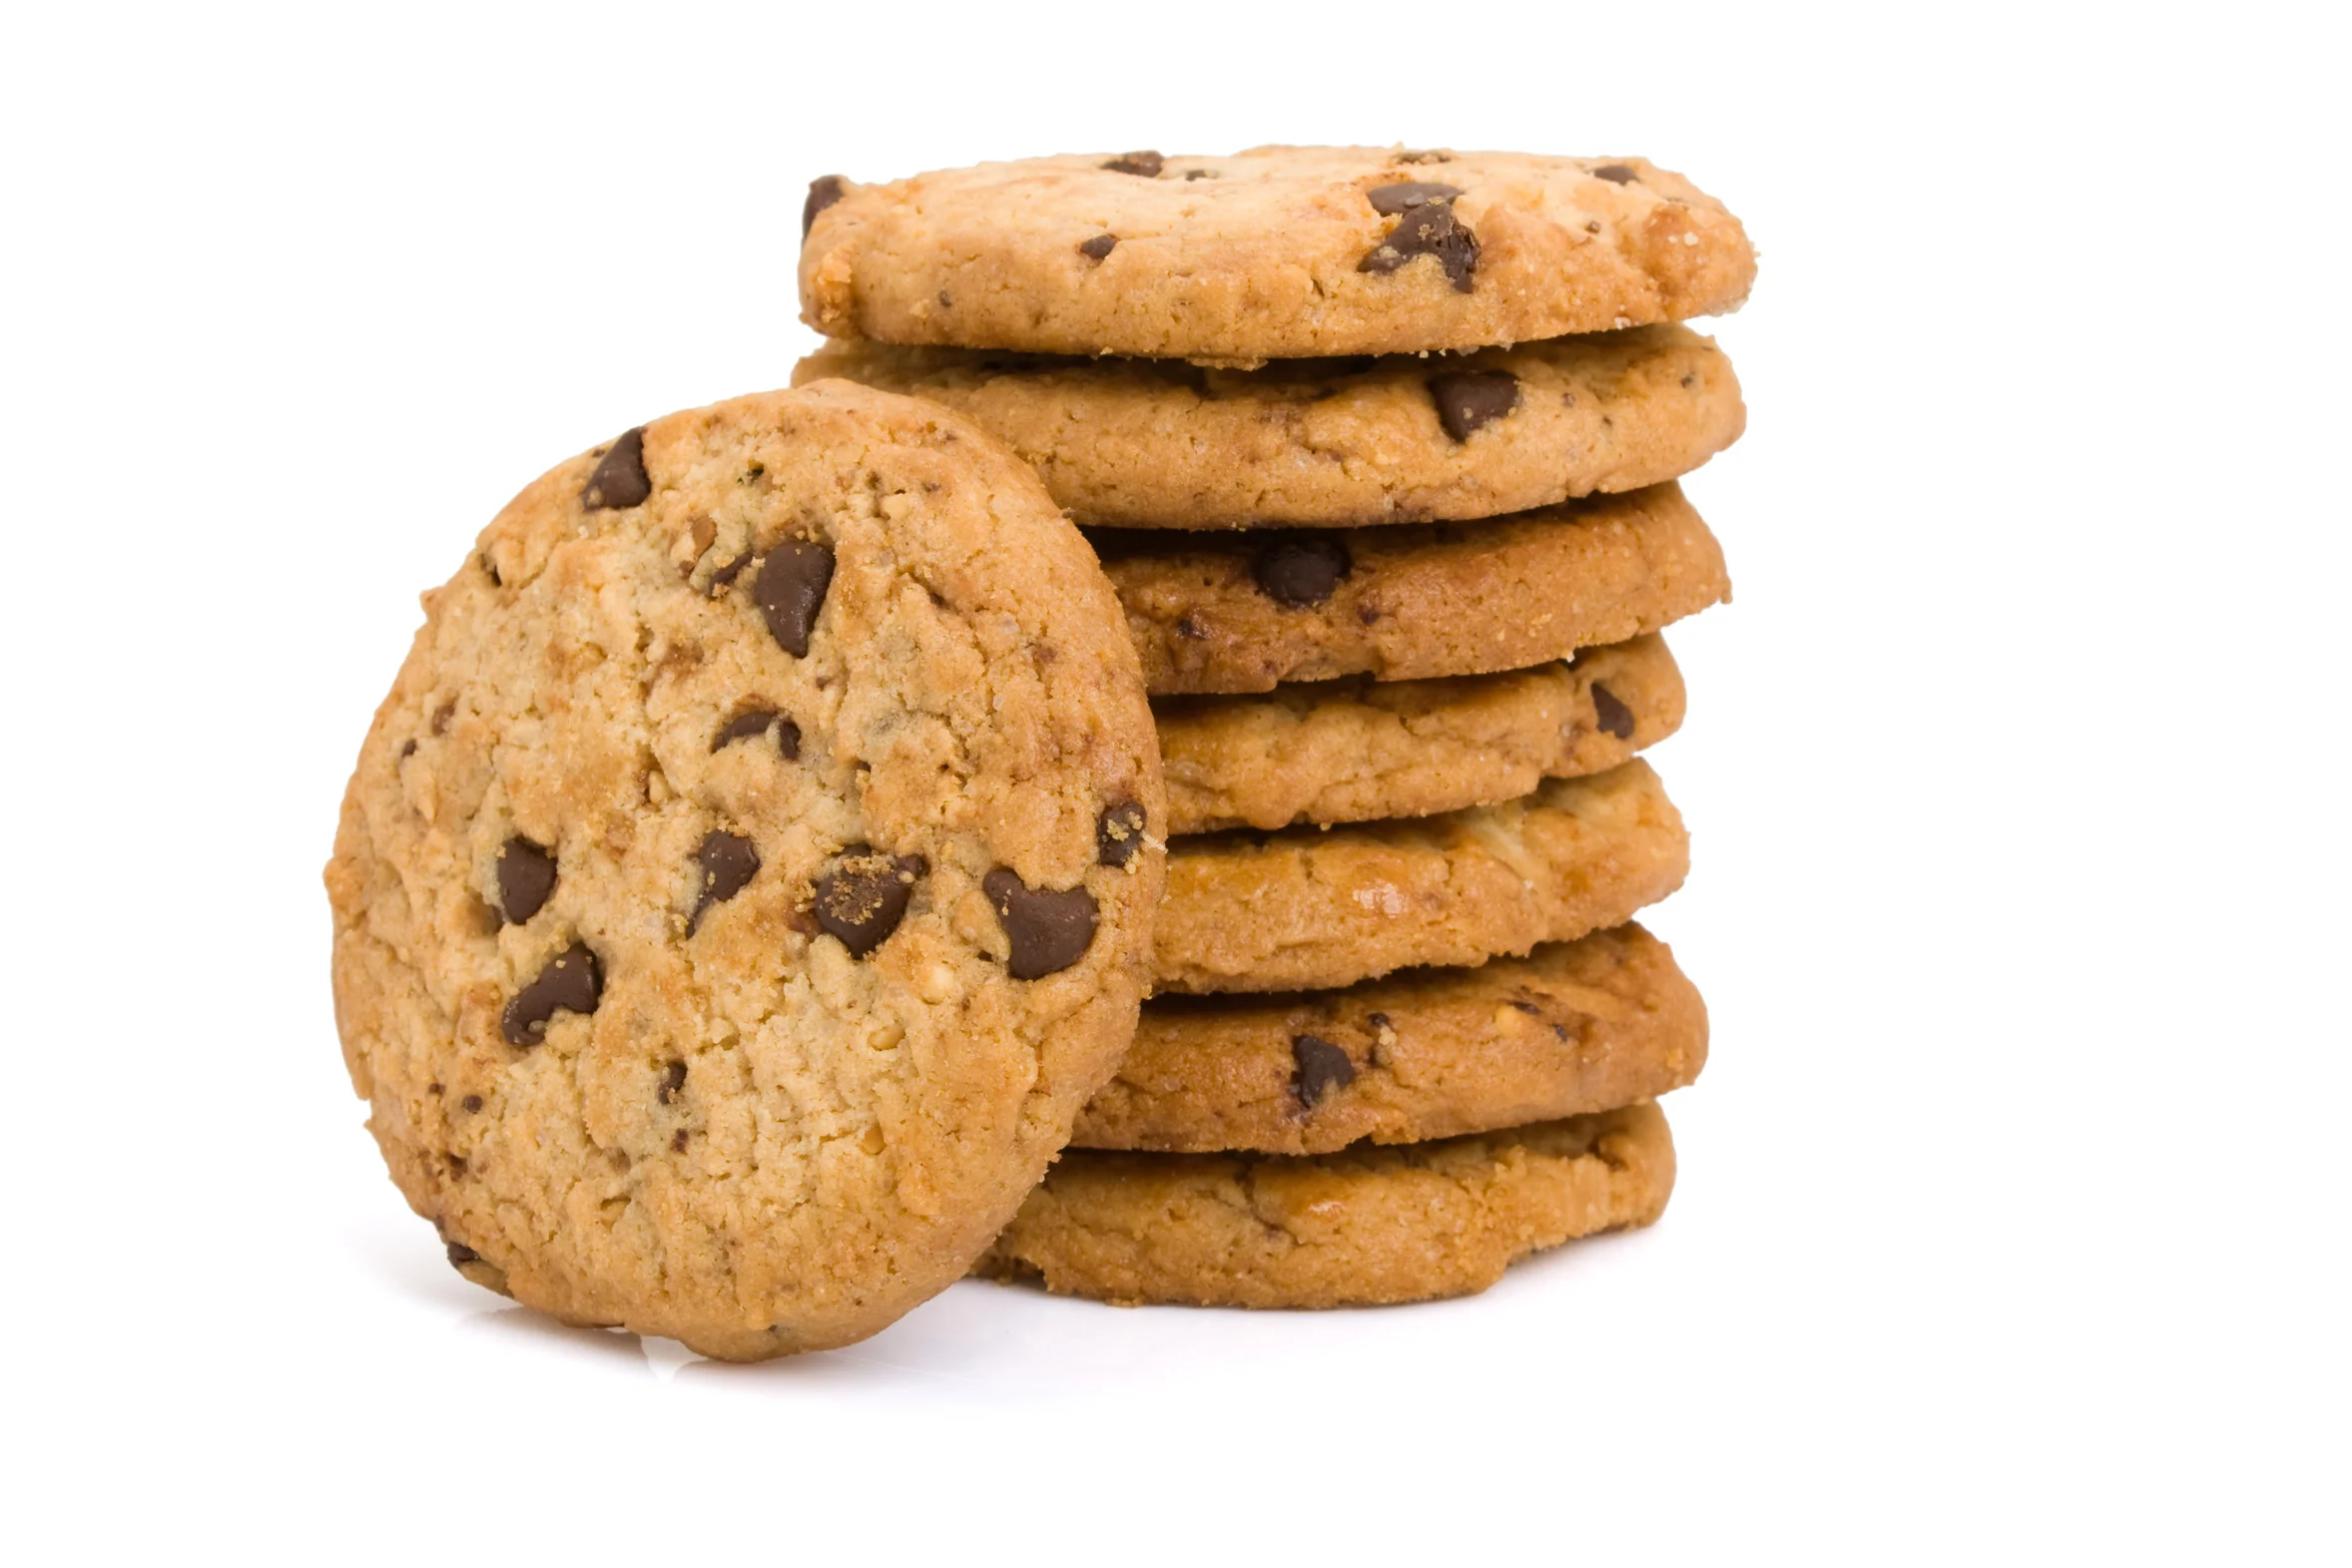 Premium Cookies Sweet Crispy Cookies and Biscuits Snacks from India at Wholesale Prices